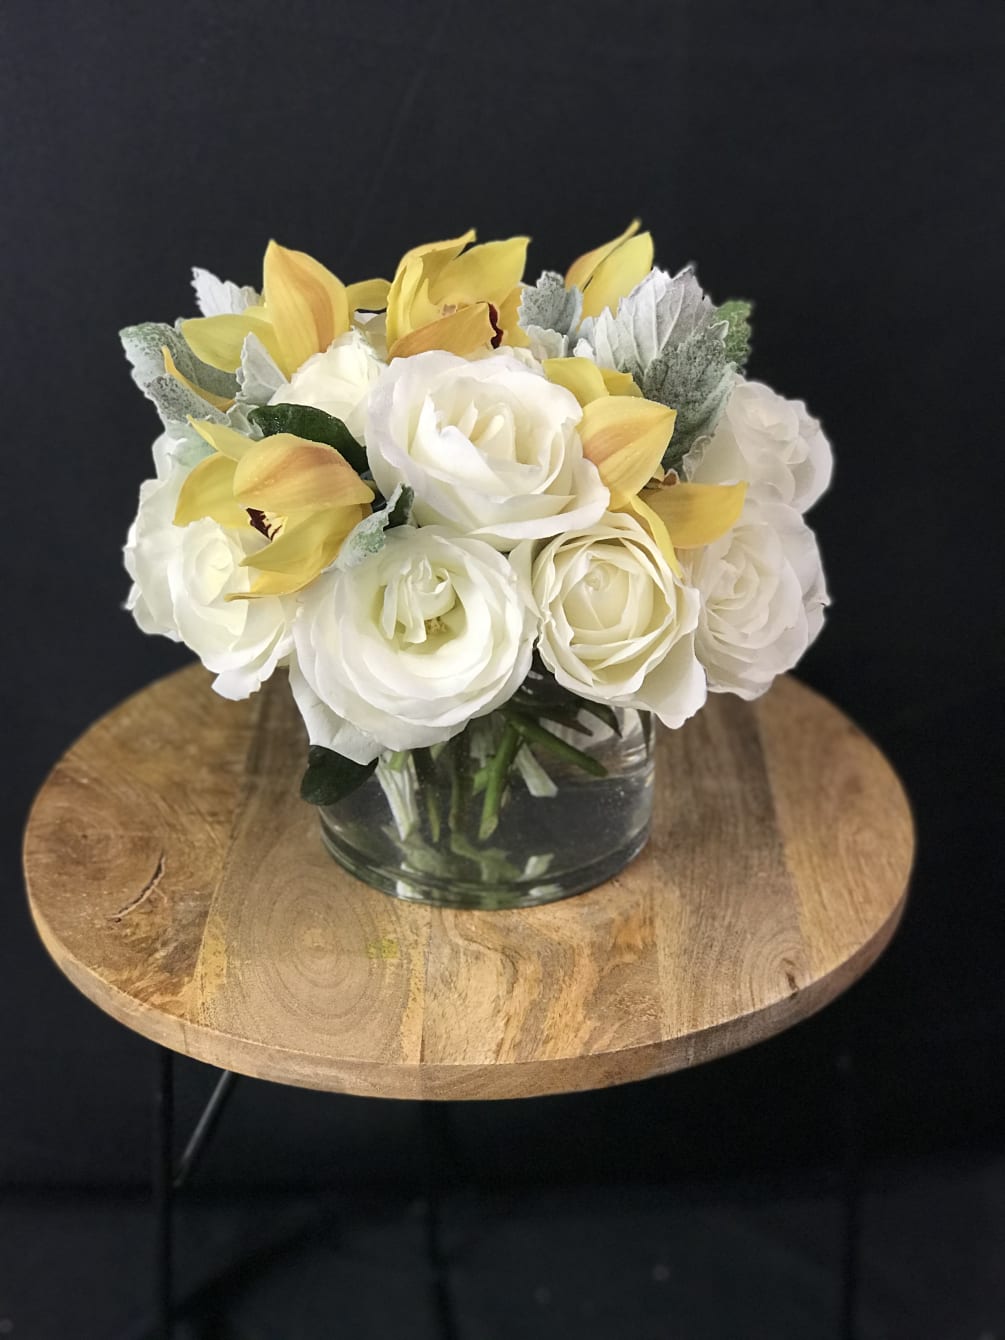 Nested in a bunches of gorgeous white roses are a some lovely